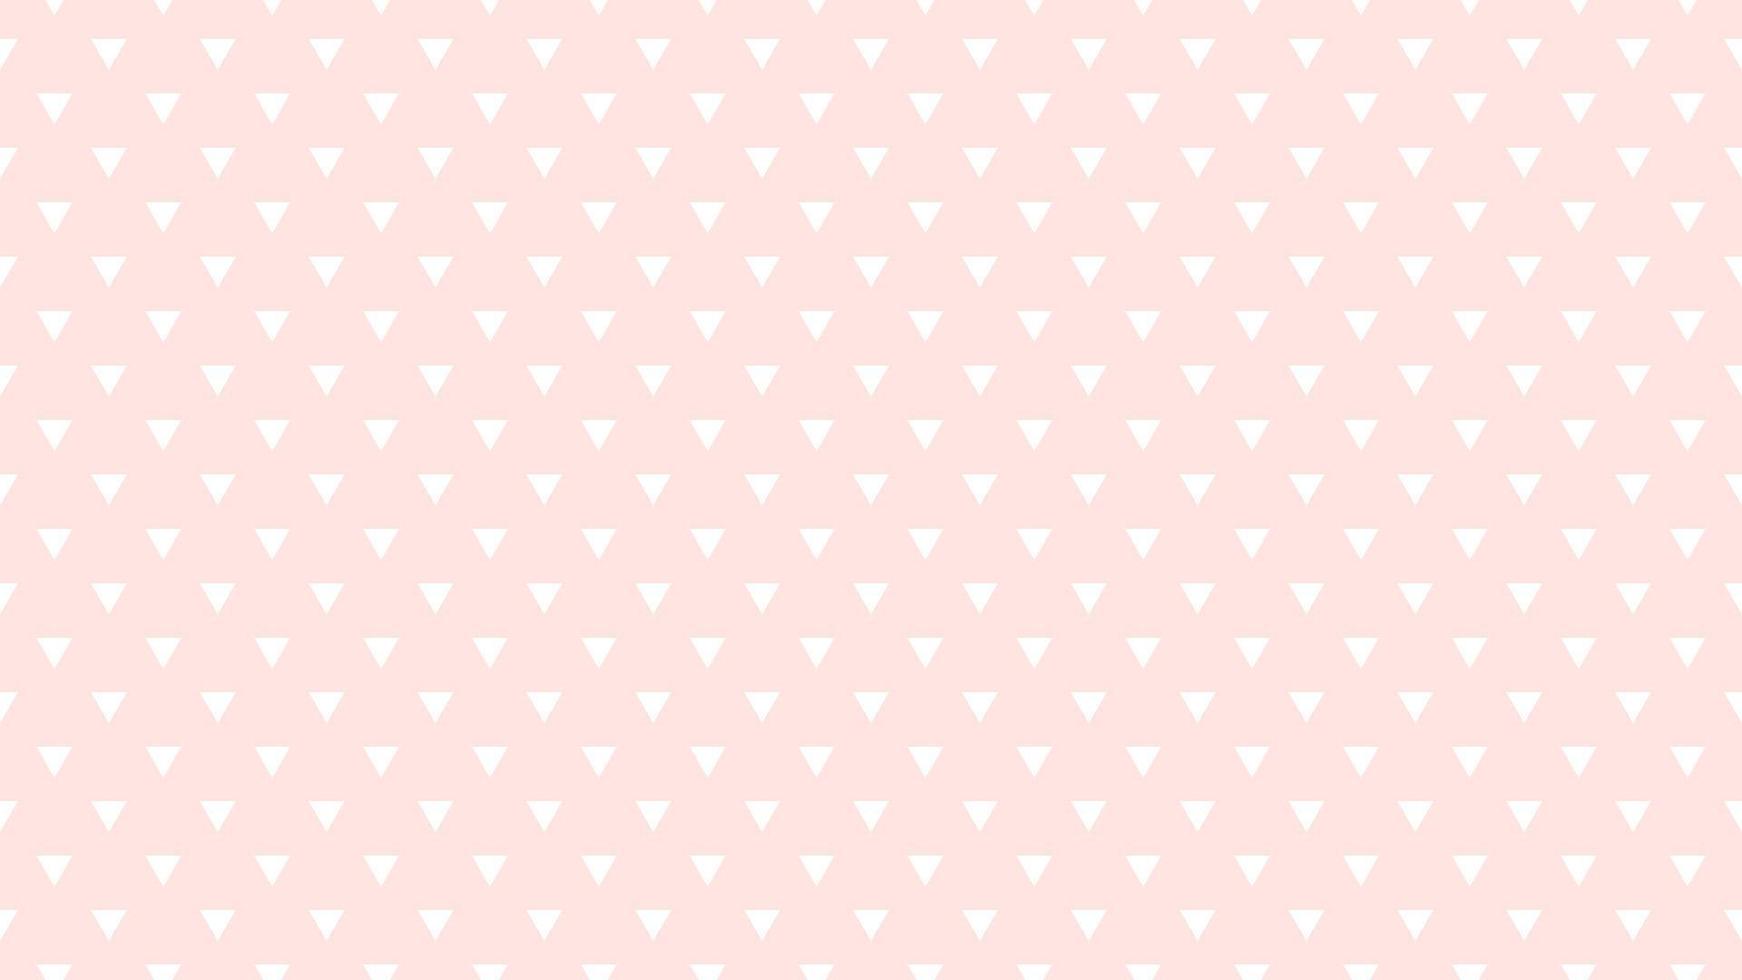 white color triangles over misty rose white background vector